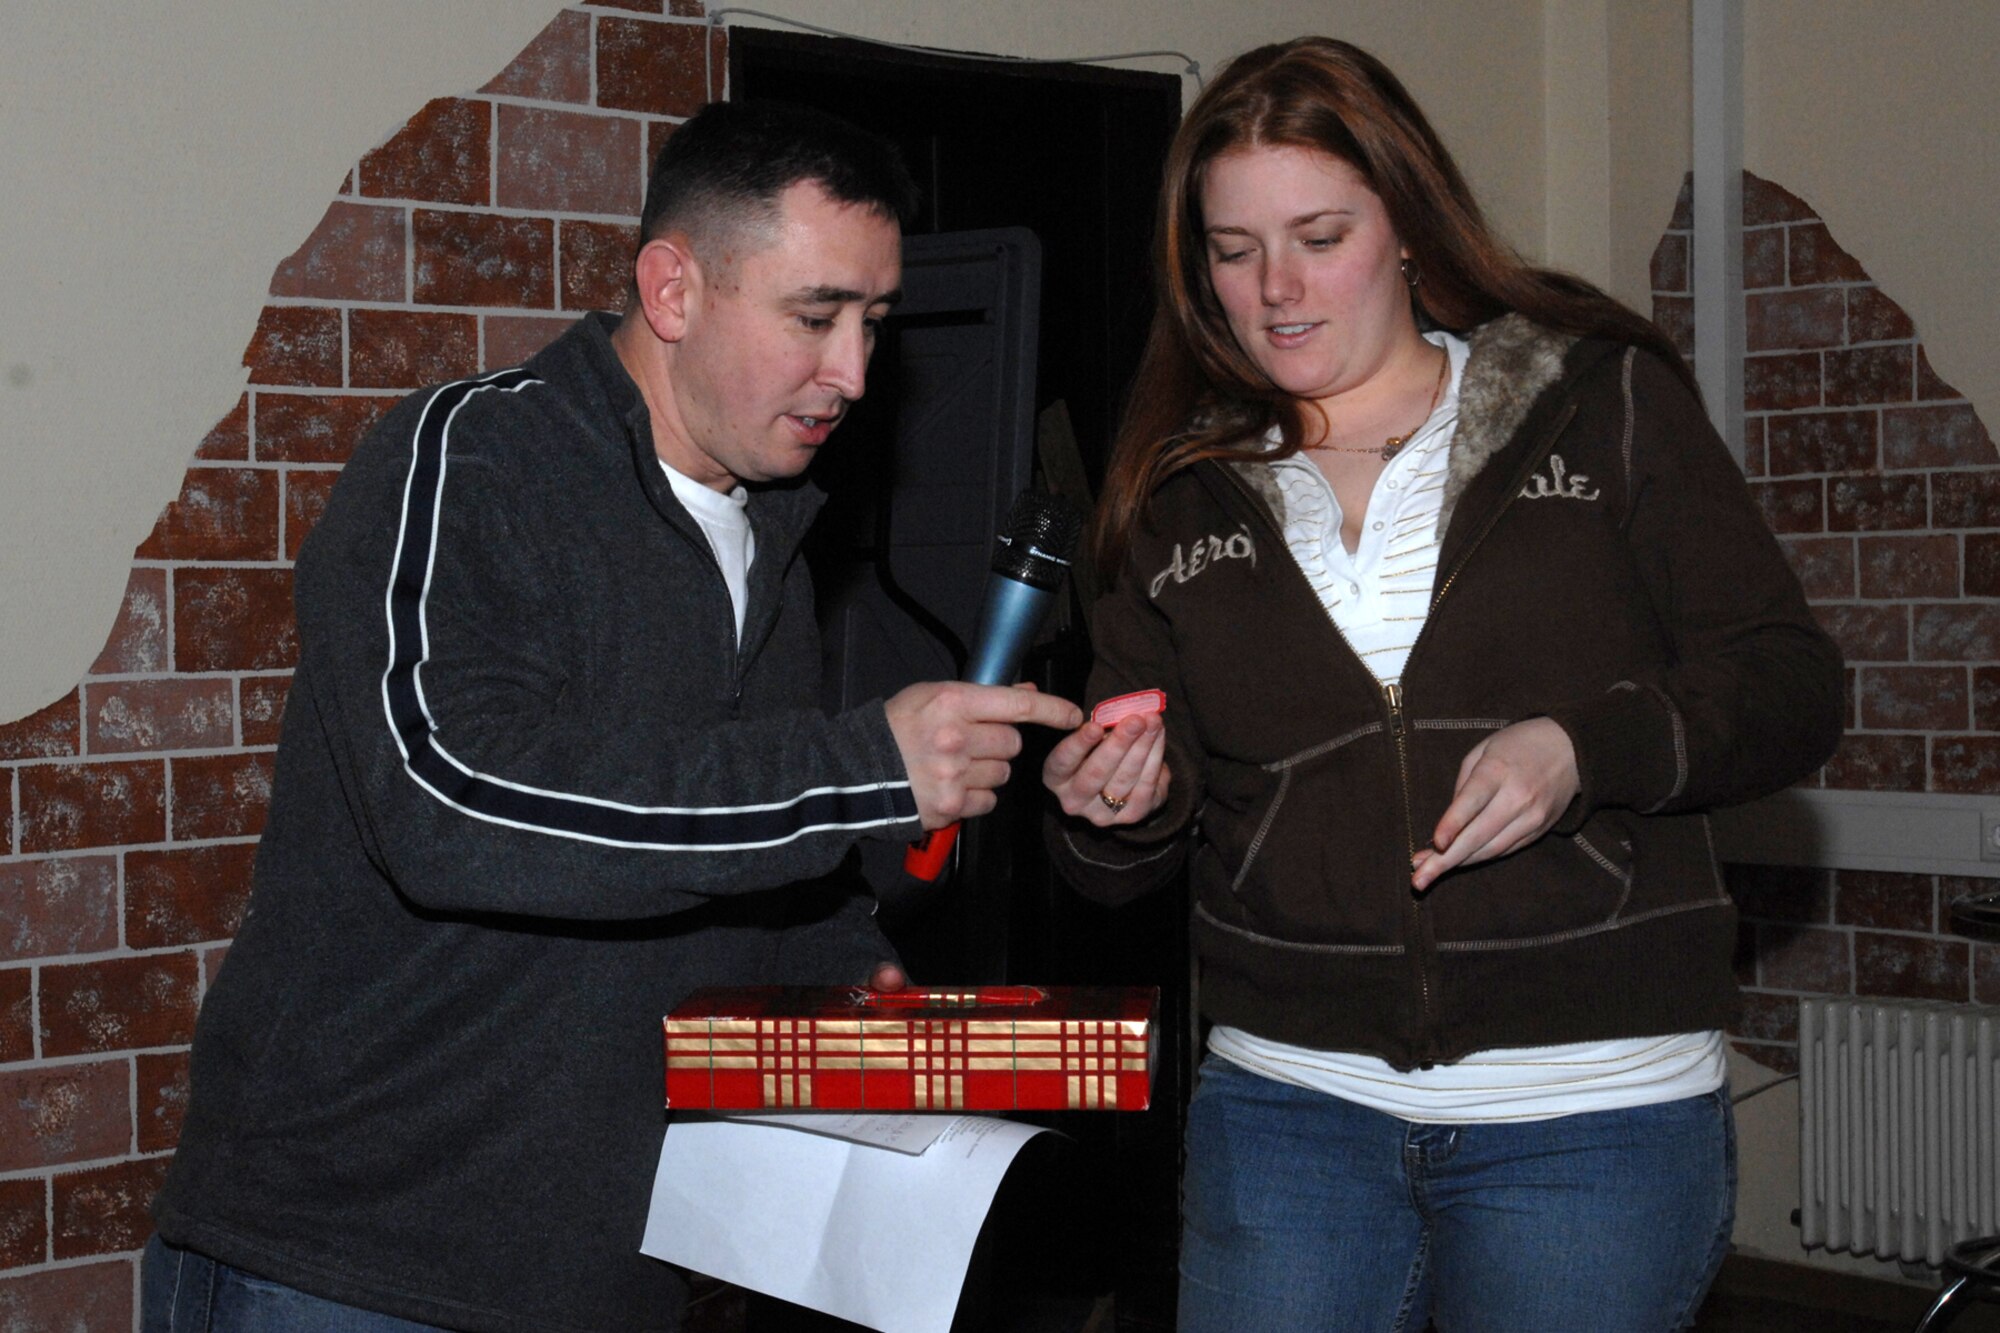 SPANGDAHLEM AIR BASE, Germany – Master Sgt. Jody Wray, 52nd Mission Support Squadron first sergeant, reads off a winner’s name as Airman 1st Class Erika Raymonds, 52nd MSS, hands him a ticket at the Unaccompanied Airman’s Holiday Party in the Brick House Dec. 22, 2007. The party sponsored by the 52nd Fighter Wing First Sergeant’s Council included a full holiday meal, door prizes and games. (U.S. Air Force photo/Airman 1st Class Jenifer Calhoun)